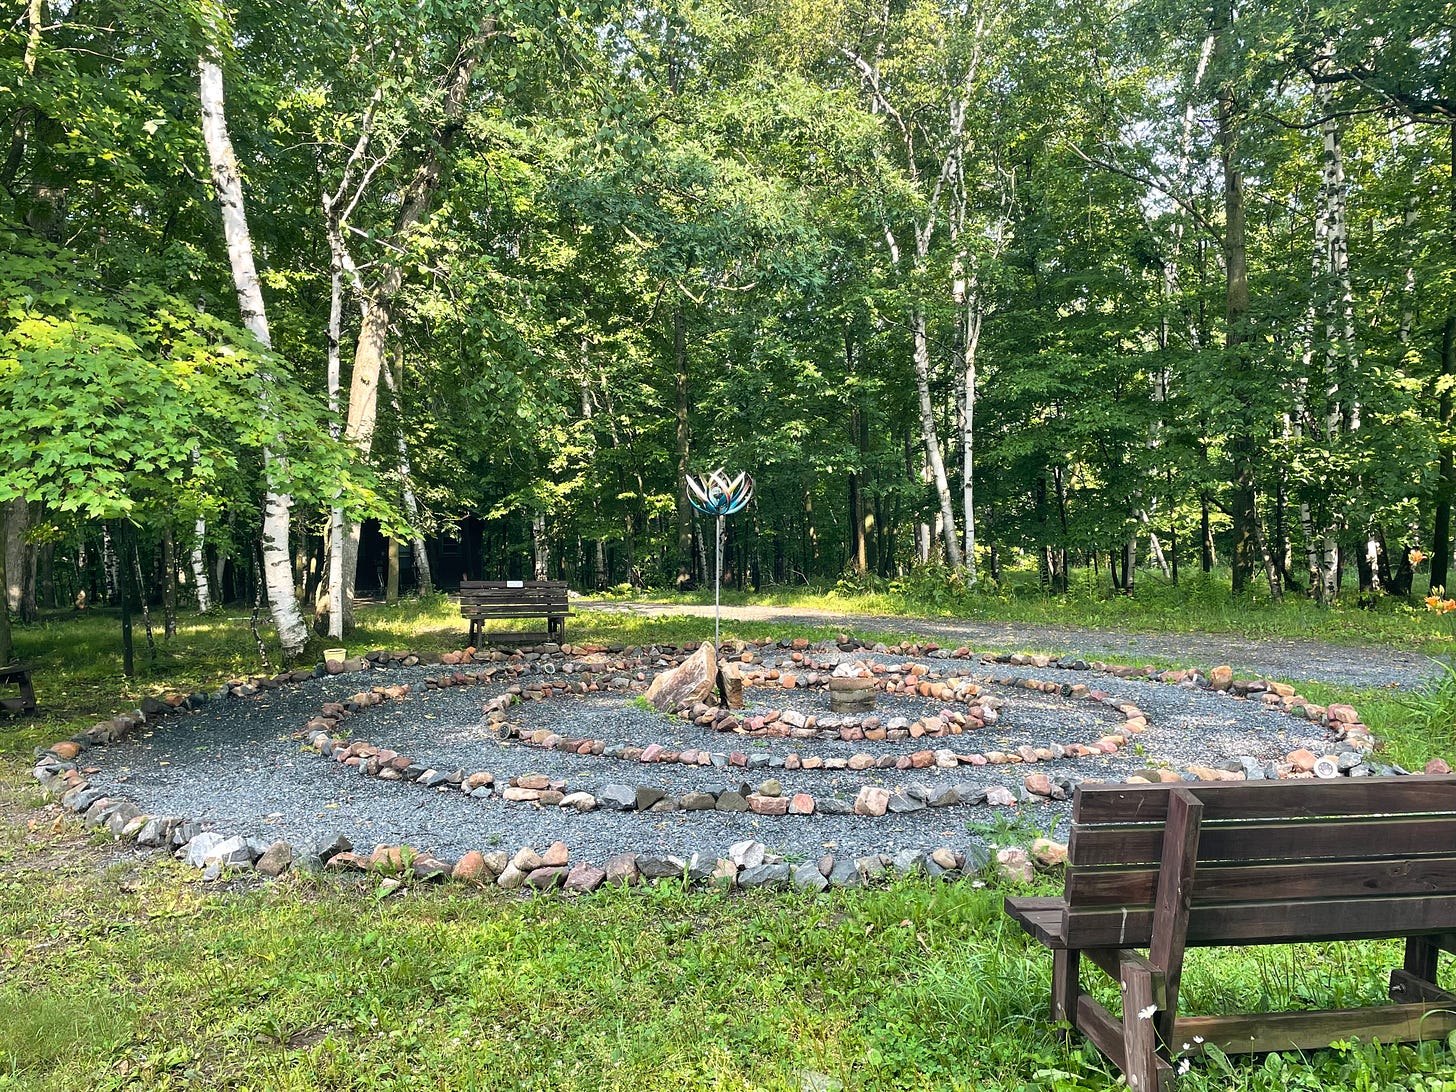 Birch trees in background behind a circular labyrinth outlined in rocks and bordered by two brown benches.